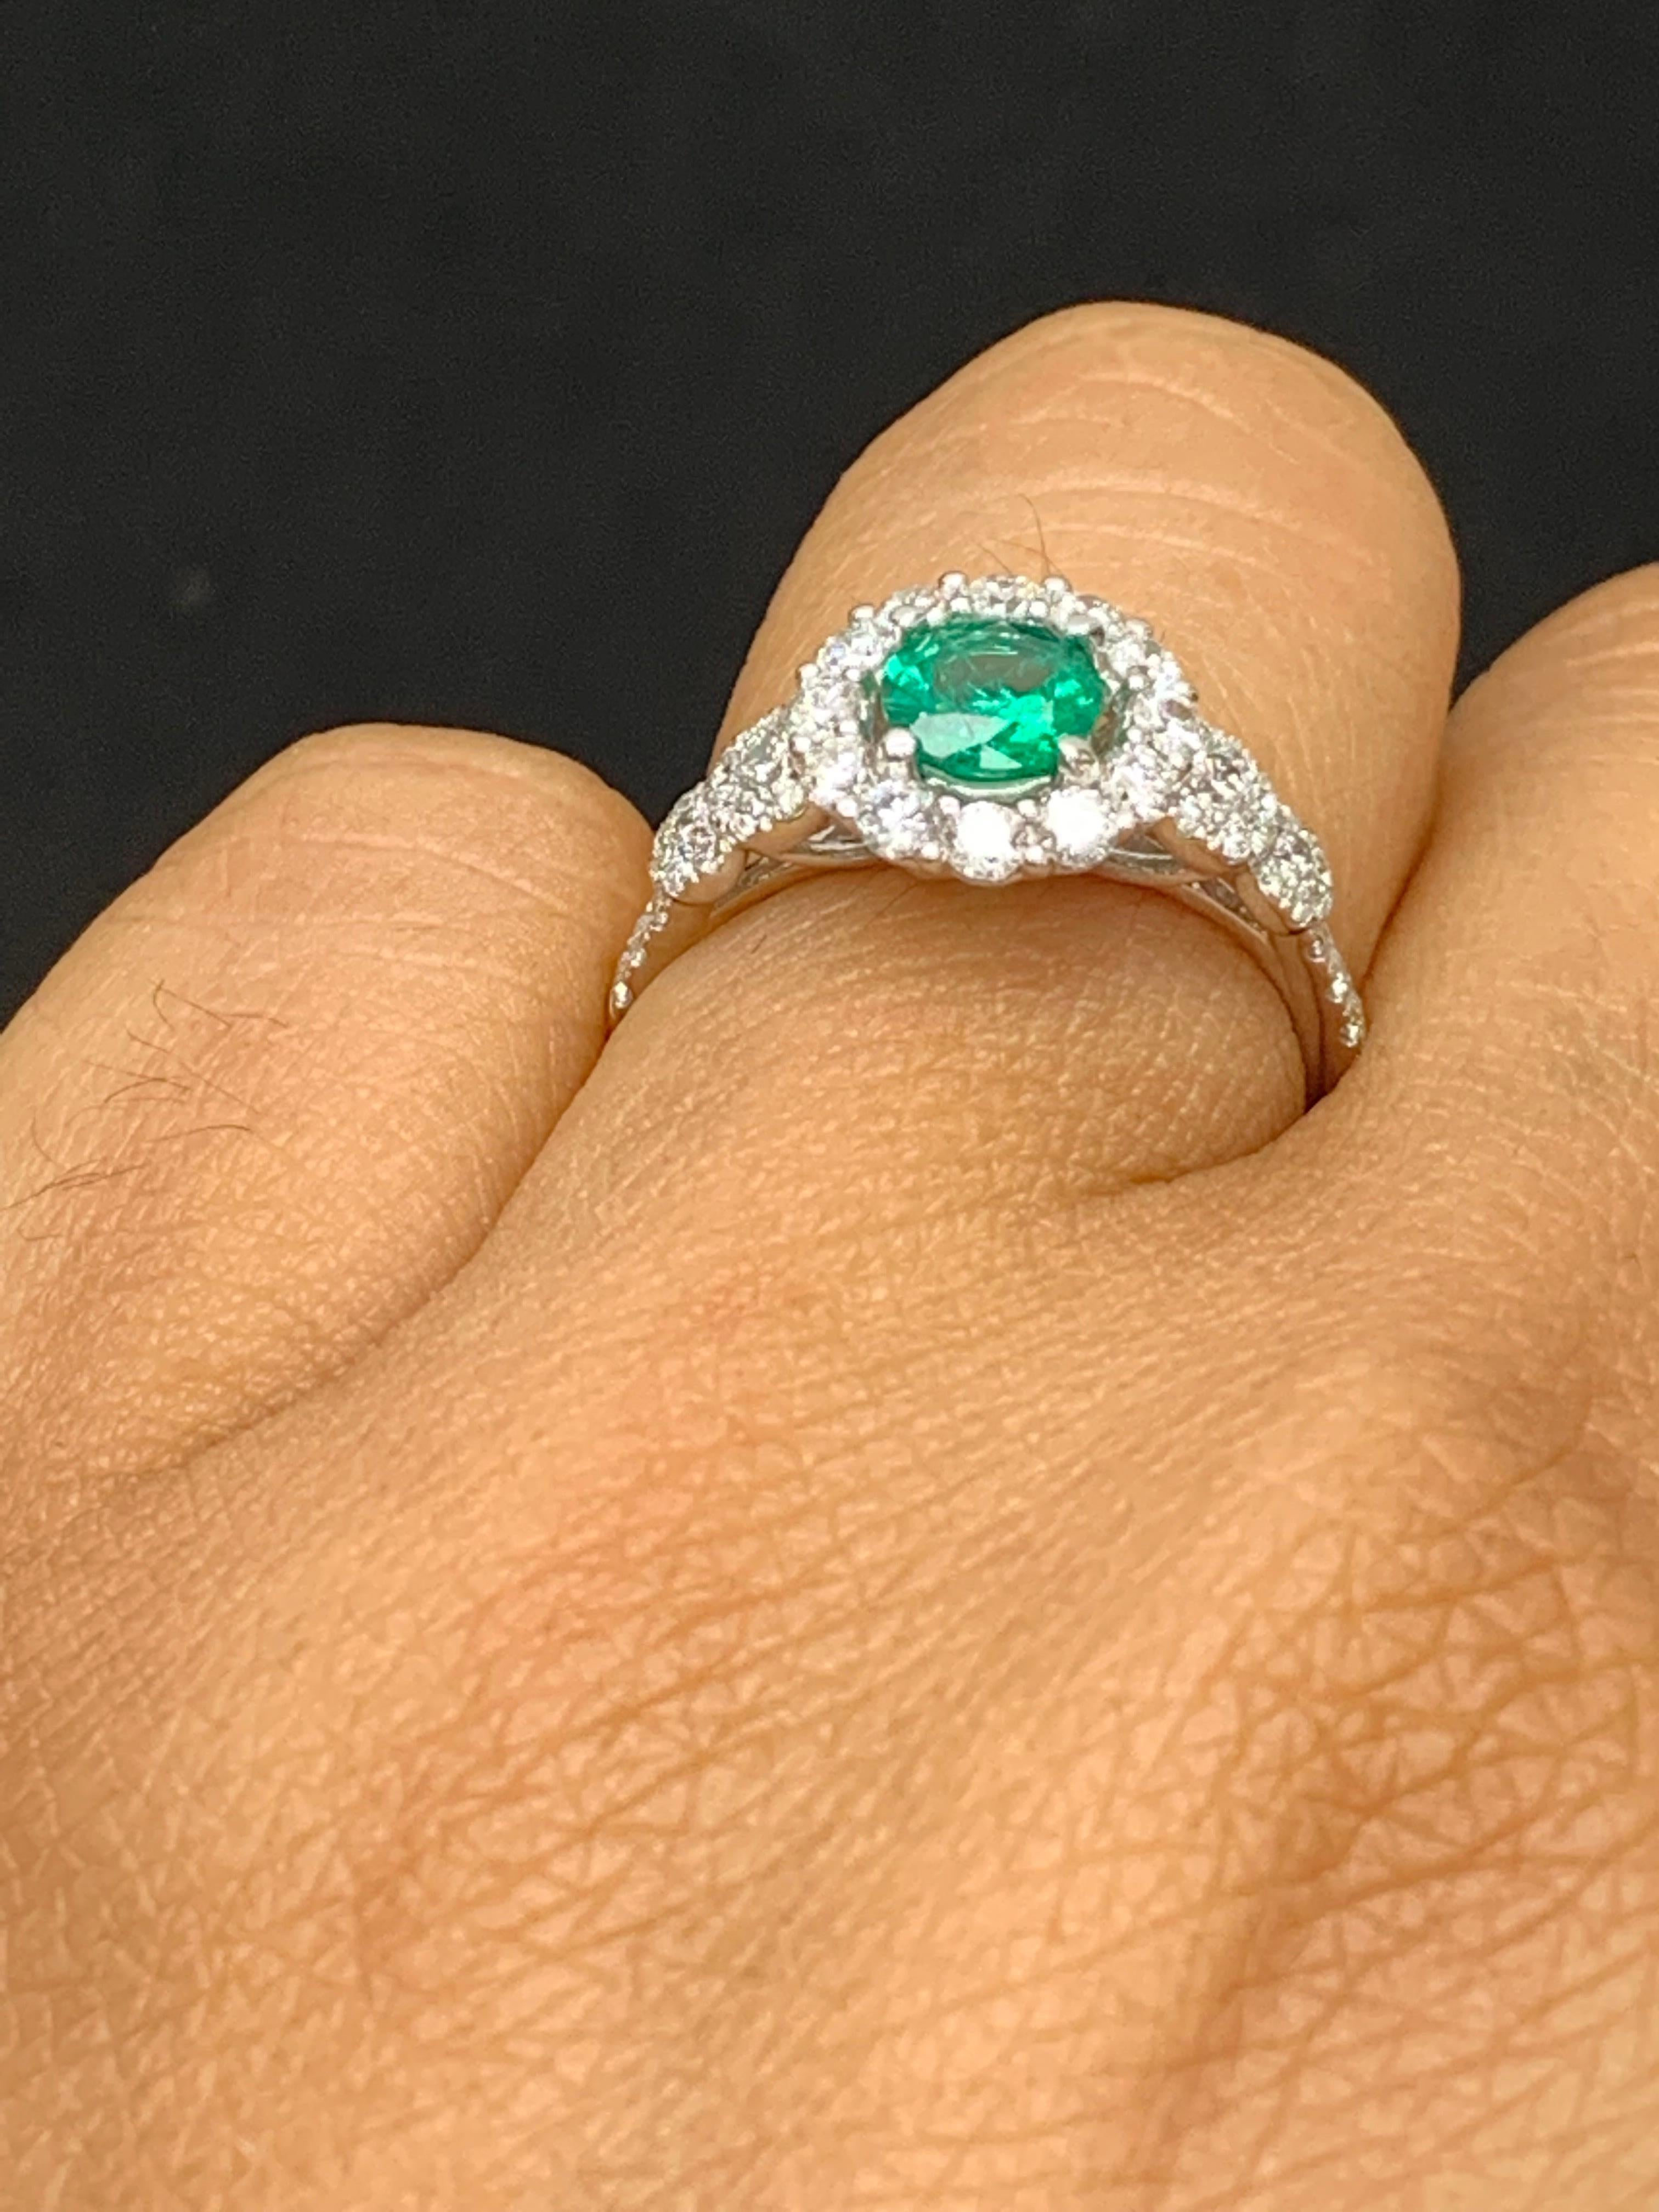 0.62 Carat Round Cut Emerald and Diamond Fashion Ring in 18k White Gold For Sale 2